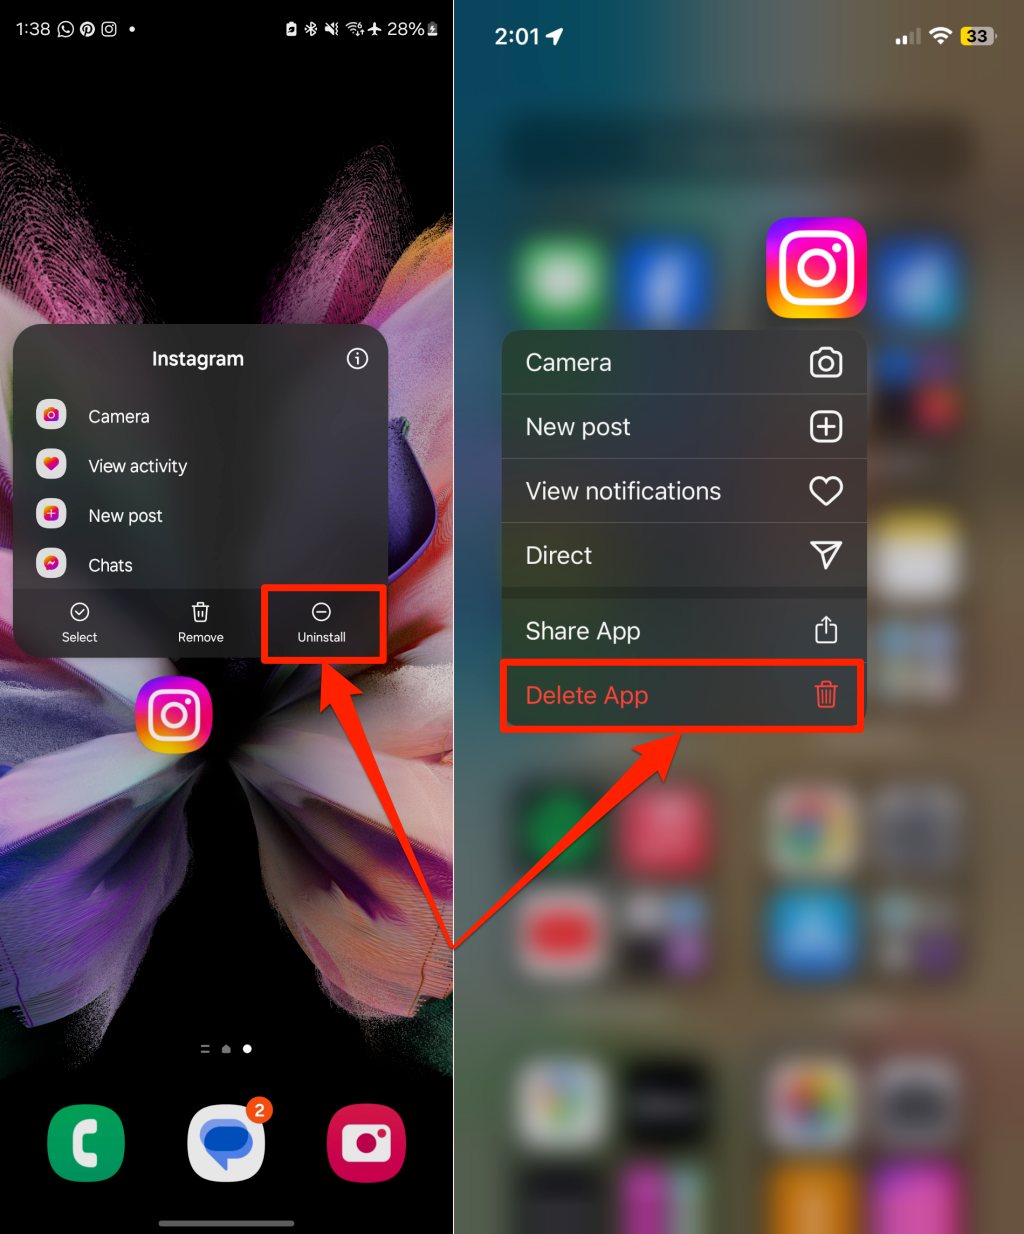 Steps to uninstall Instagram in Android and iOS